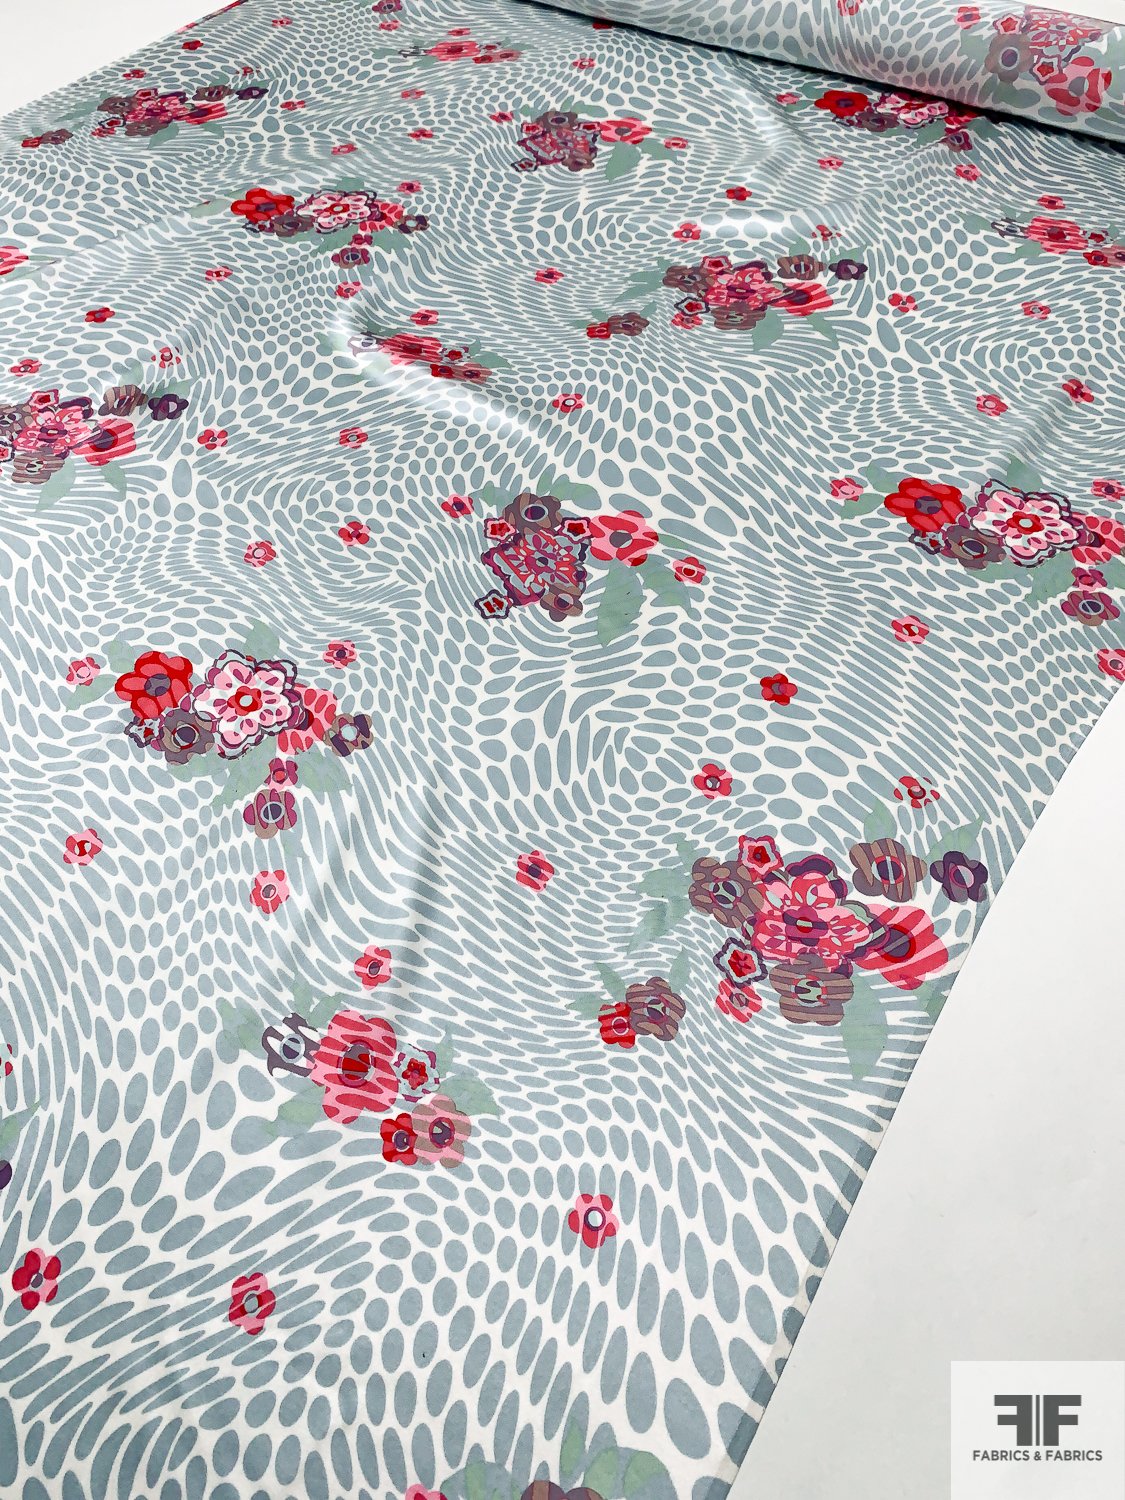 Hypnotic and Floral Printed Silk Charmeuse - Dusty Seafoam / Purples / Pinks